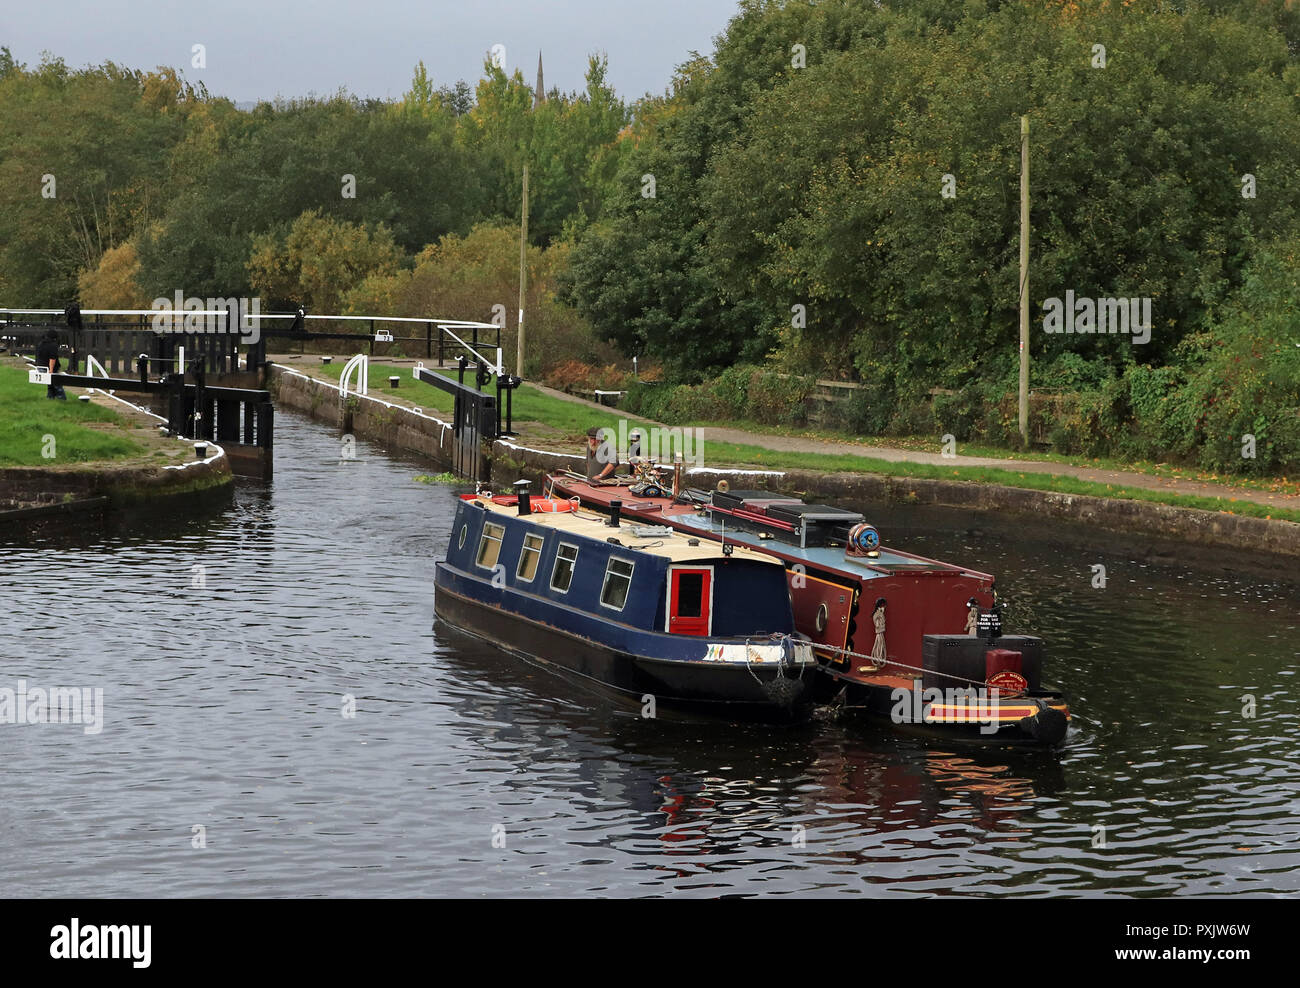 Leeds and Liverpool canal reopens, Wigan, England Wigan, Lancashire. 23rd October 2018. Two narrow boats are leaving lock 73 on the long flight of locks up from Wigan to Aspull on The Leeds and Liverpool canal on 23.10.18. These where the 1st boats to ascend the flight of 21 locks following the reopening the previous afternoon.  The locks where closed back in July following the prolonged dry spell of weather in the spring and summer that meant the reservoirs that feed water to the canal became depleted of supplies. Cw 6453  Colin Wareing /Alamy Live news. Stock Photo